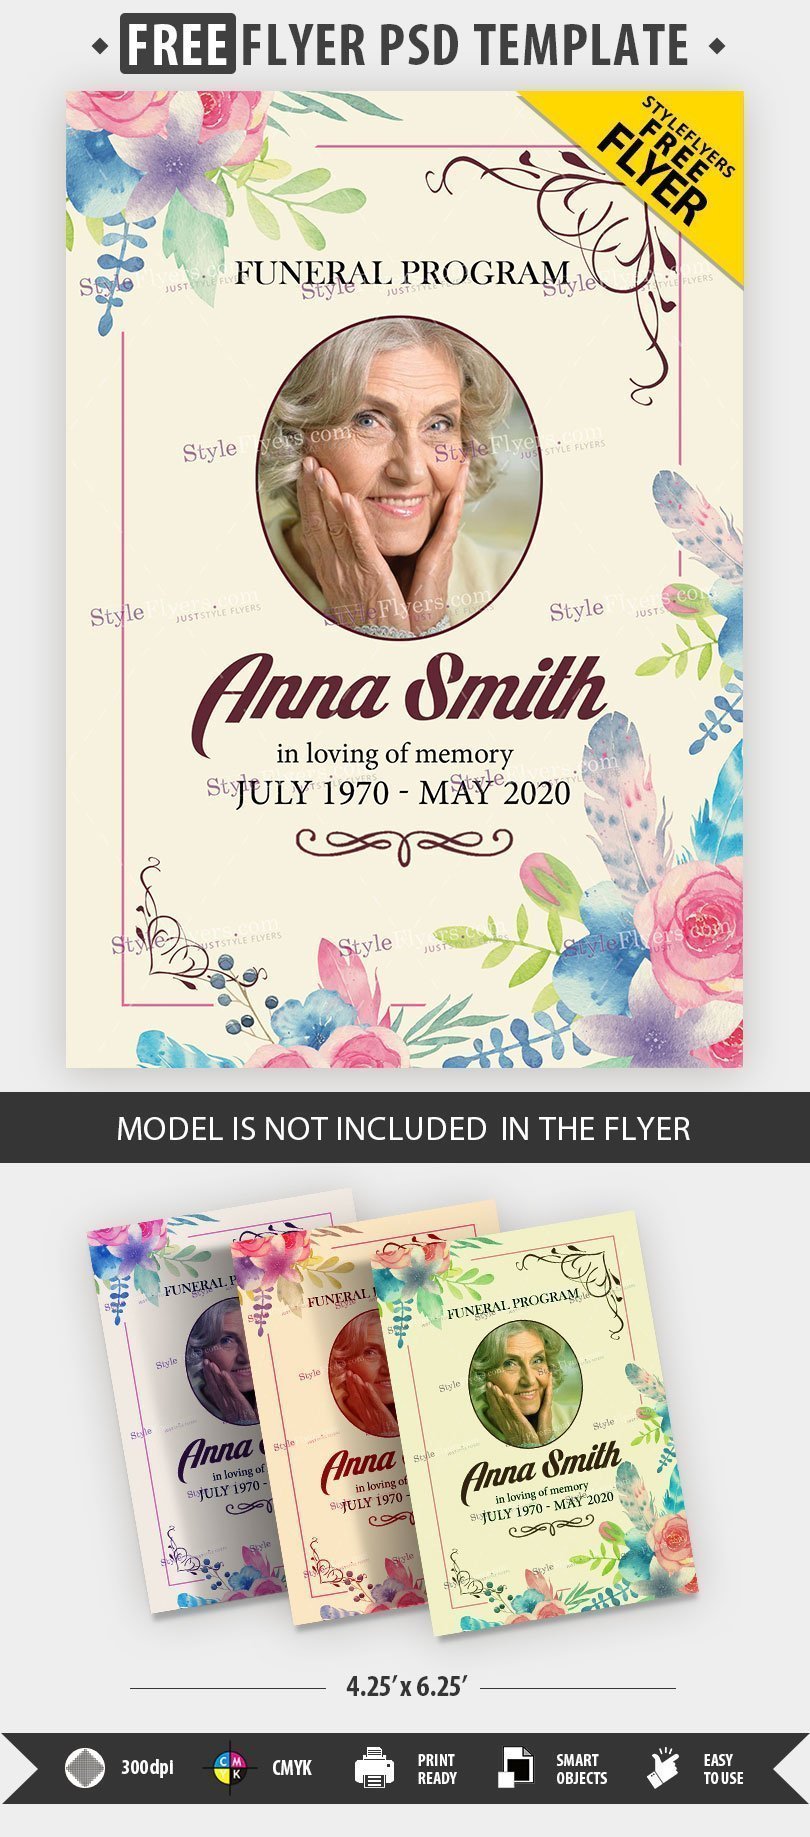 Funeral Program FREE PSD Flyer Template Free Download 36376 Styleflyers